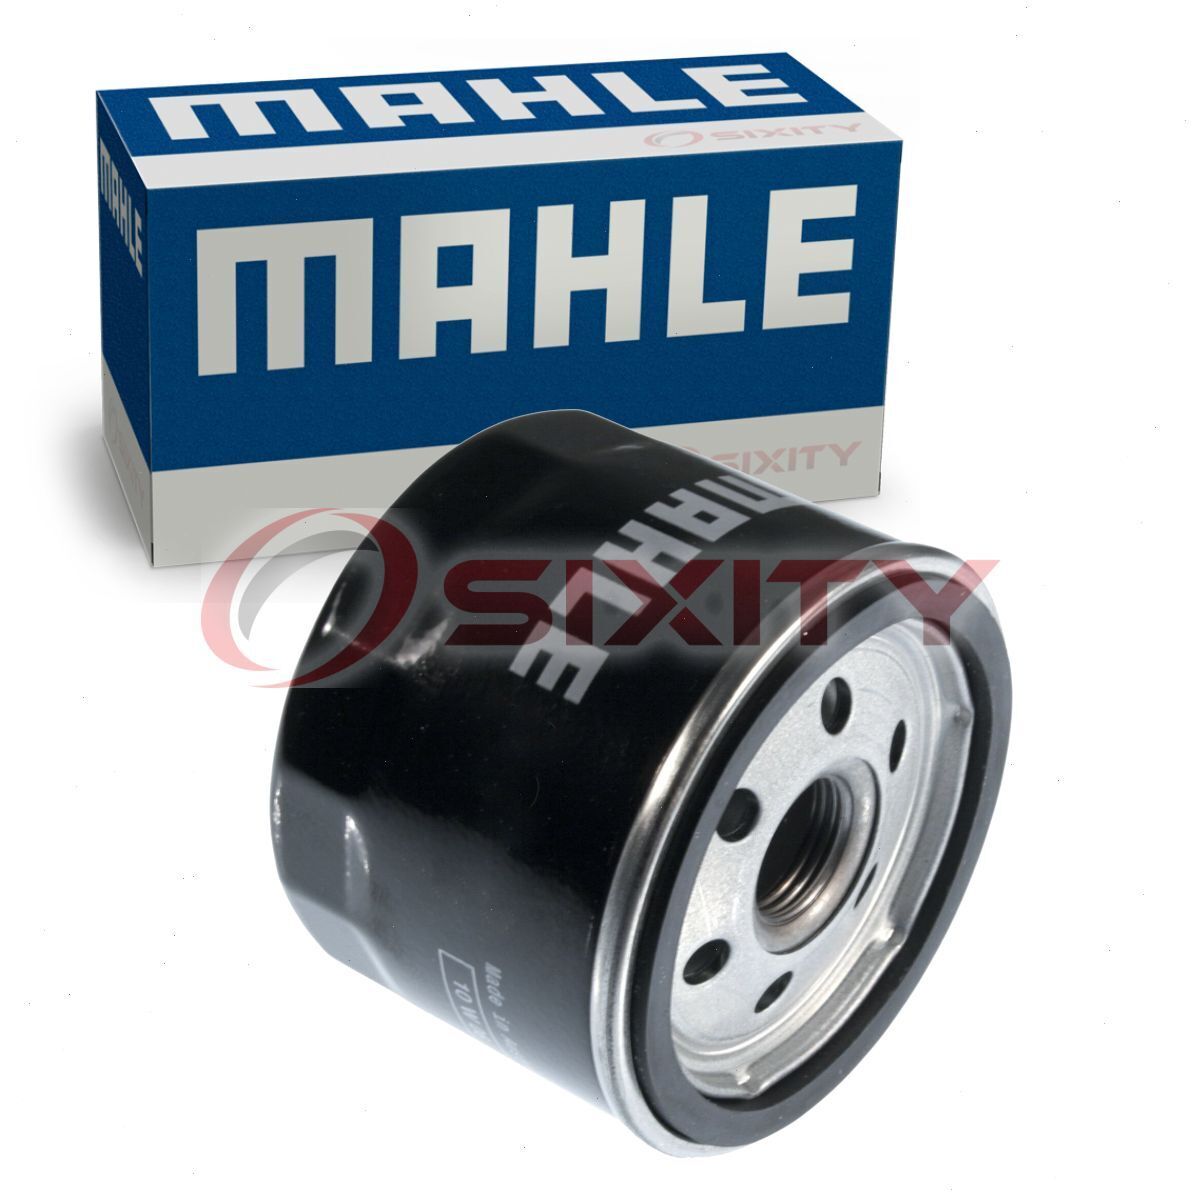 MAHLE Engine Oil Filter for 2010-2019 BMW S1000RR -- -L Oil Change Lubricant ic